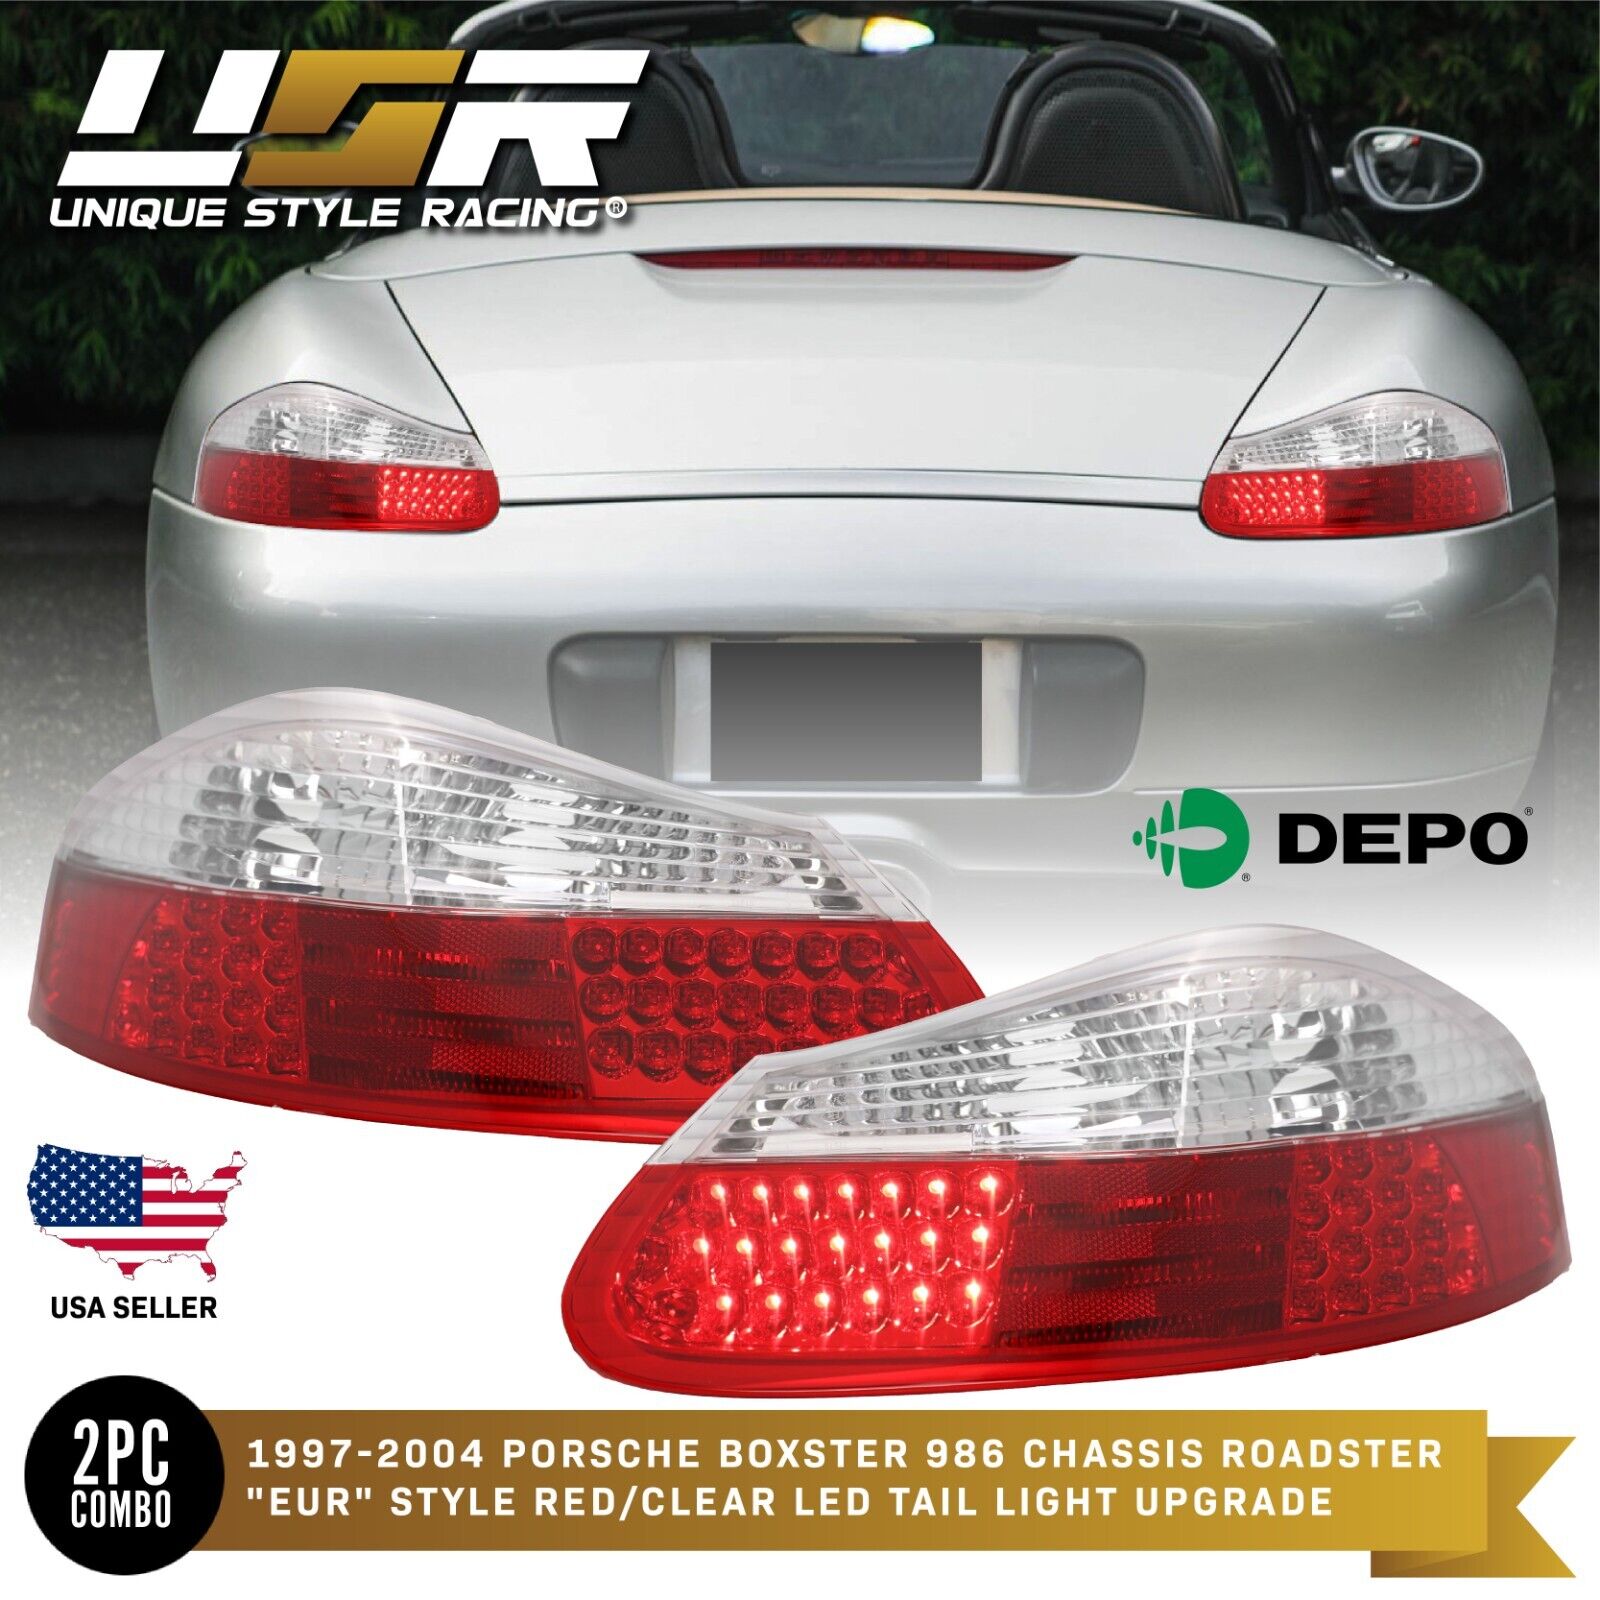 DEPO Red / Clear LED Tail Light Lamp Pair For 97-04 Porsche Boxster 986 Roadster